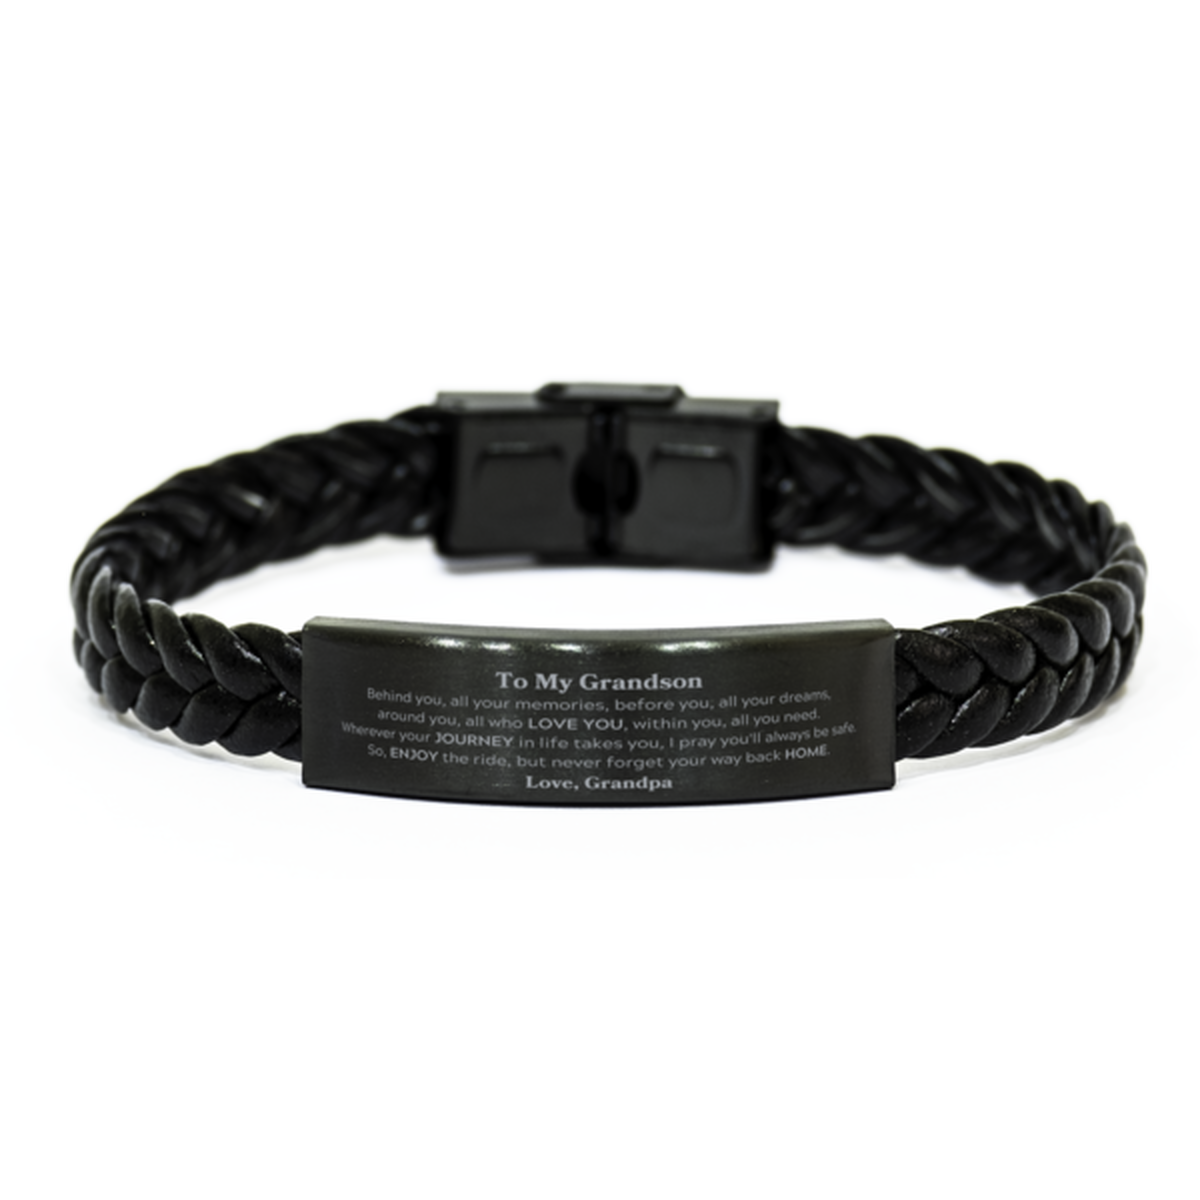 To My Grandson Graduation Gifts from Grandpa, Grandson Braided Leather Bracelet Christmas Birthday Gifts for Grandson Behind you, all your memories, before you, all your dreams. Love, Grandpa